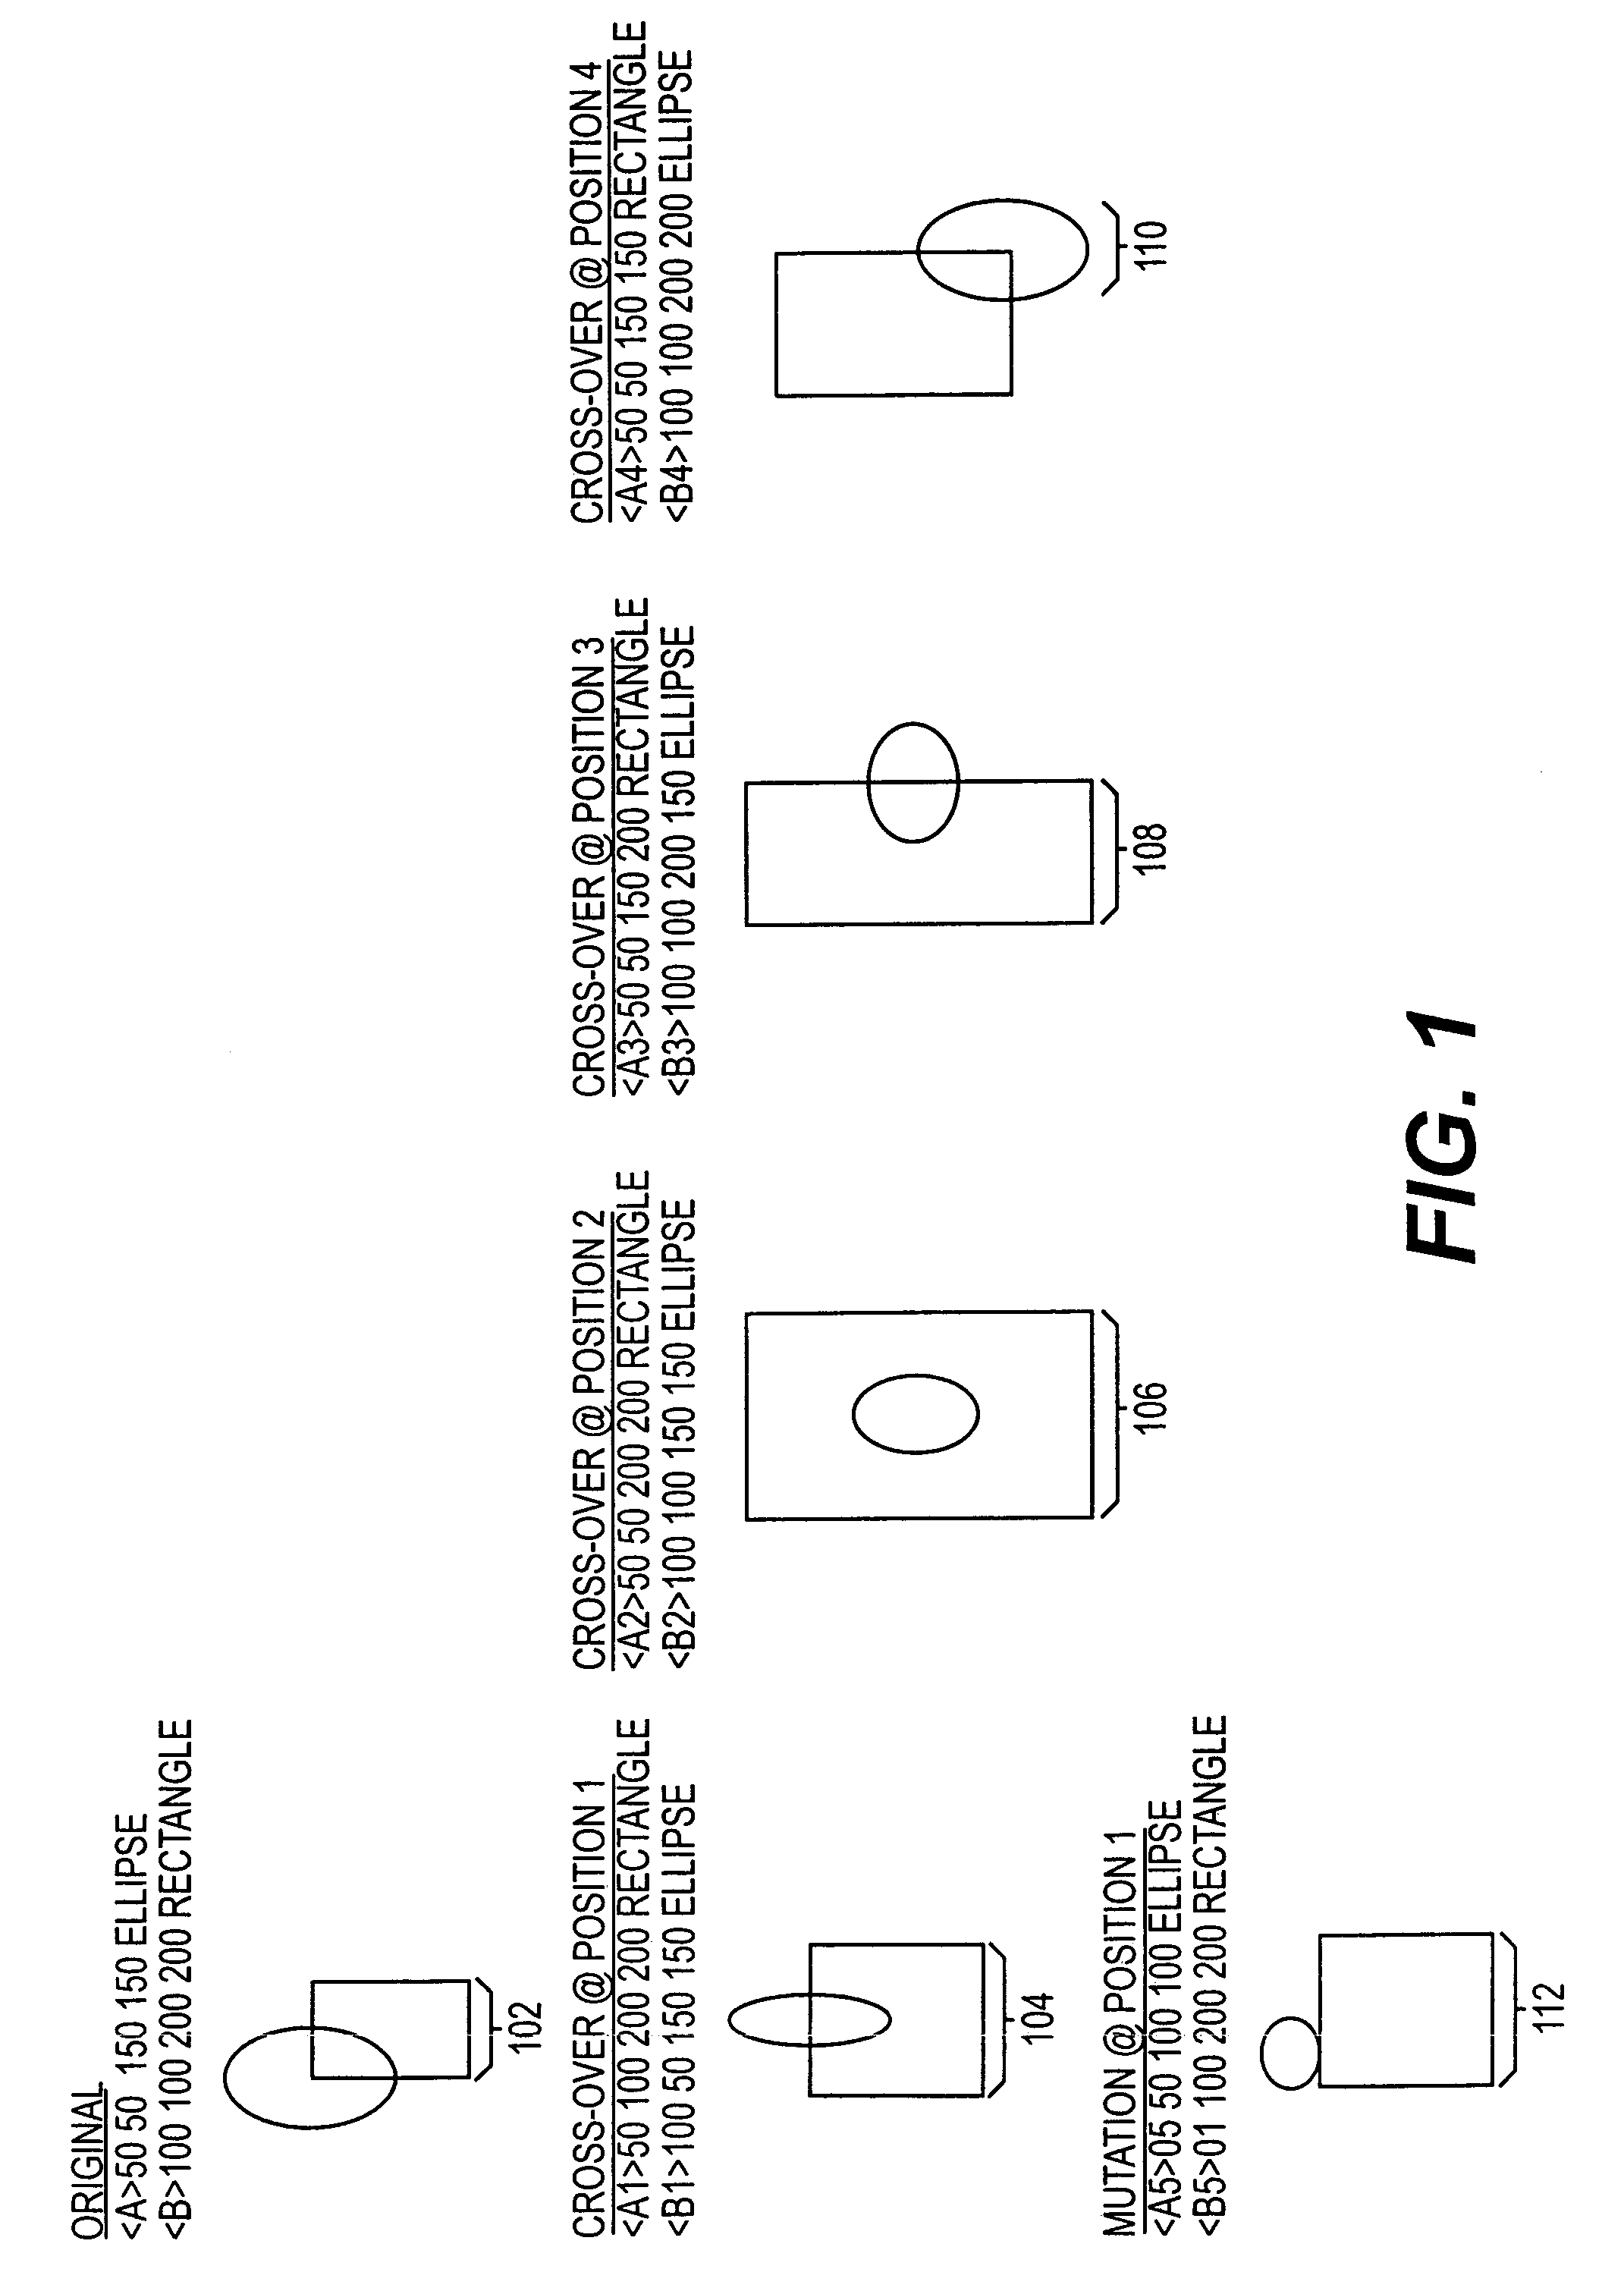 Fault tolerant and combinatorial software environment system, method and medium